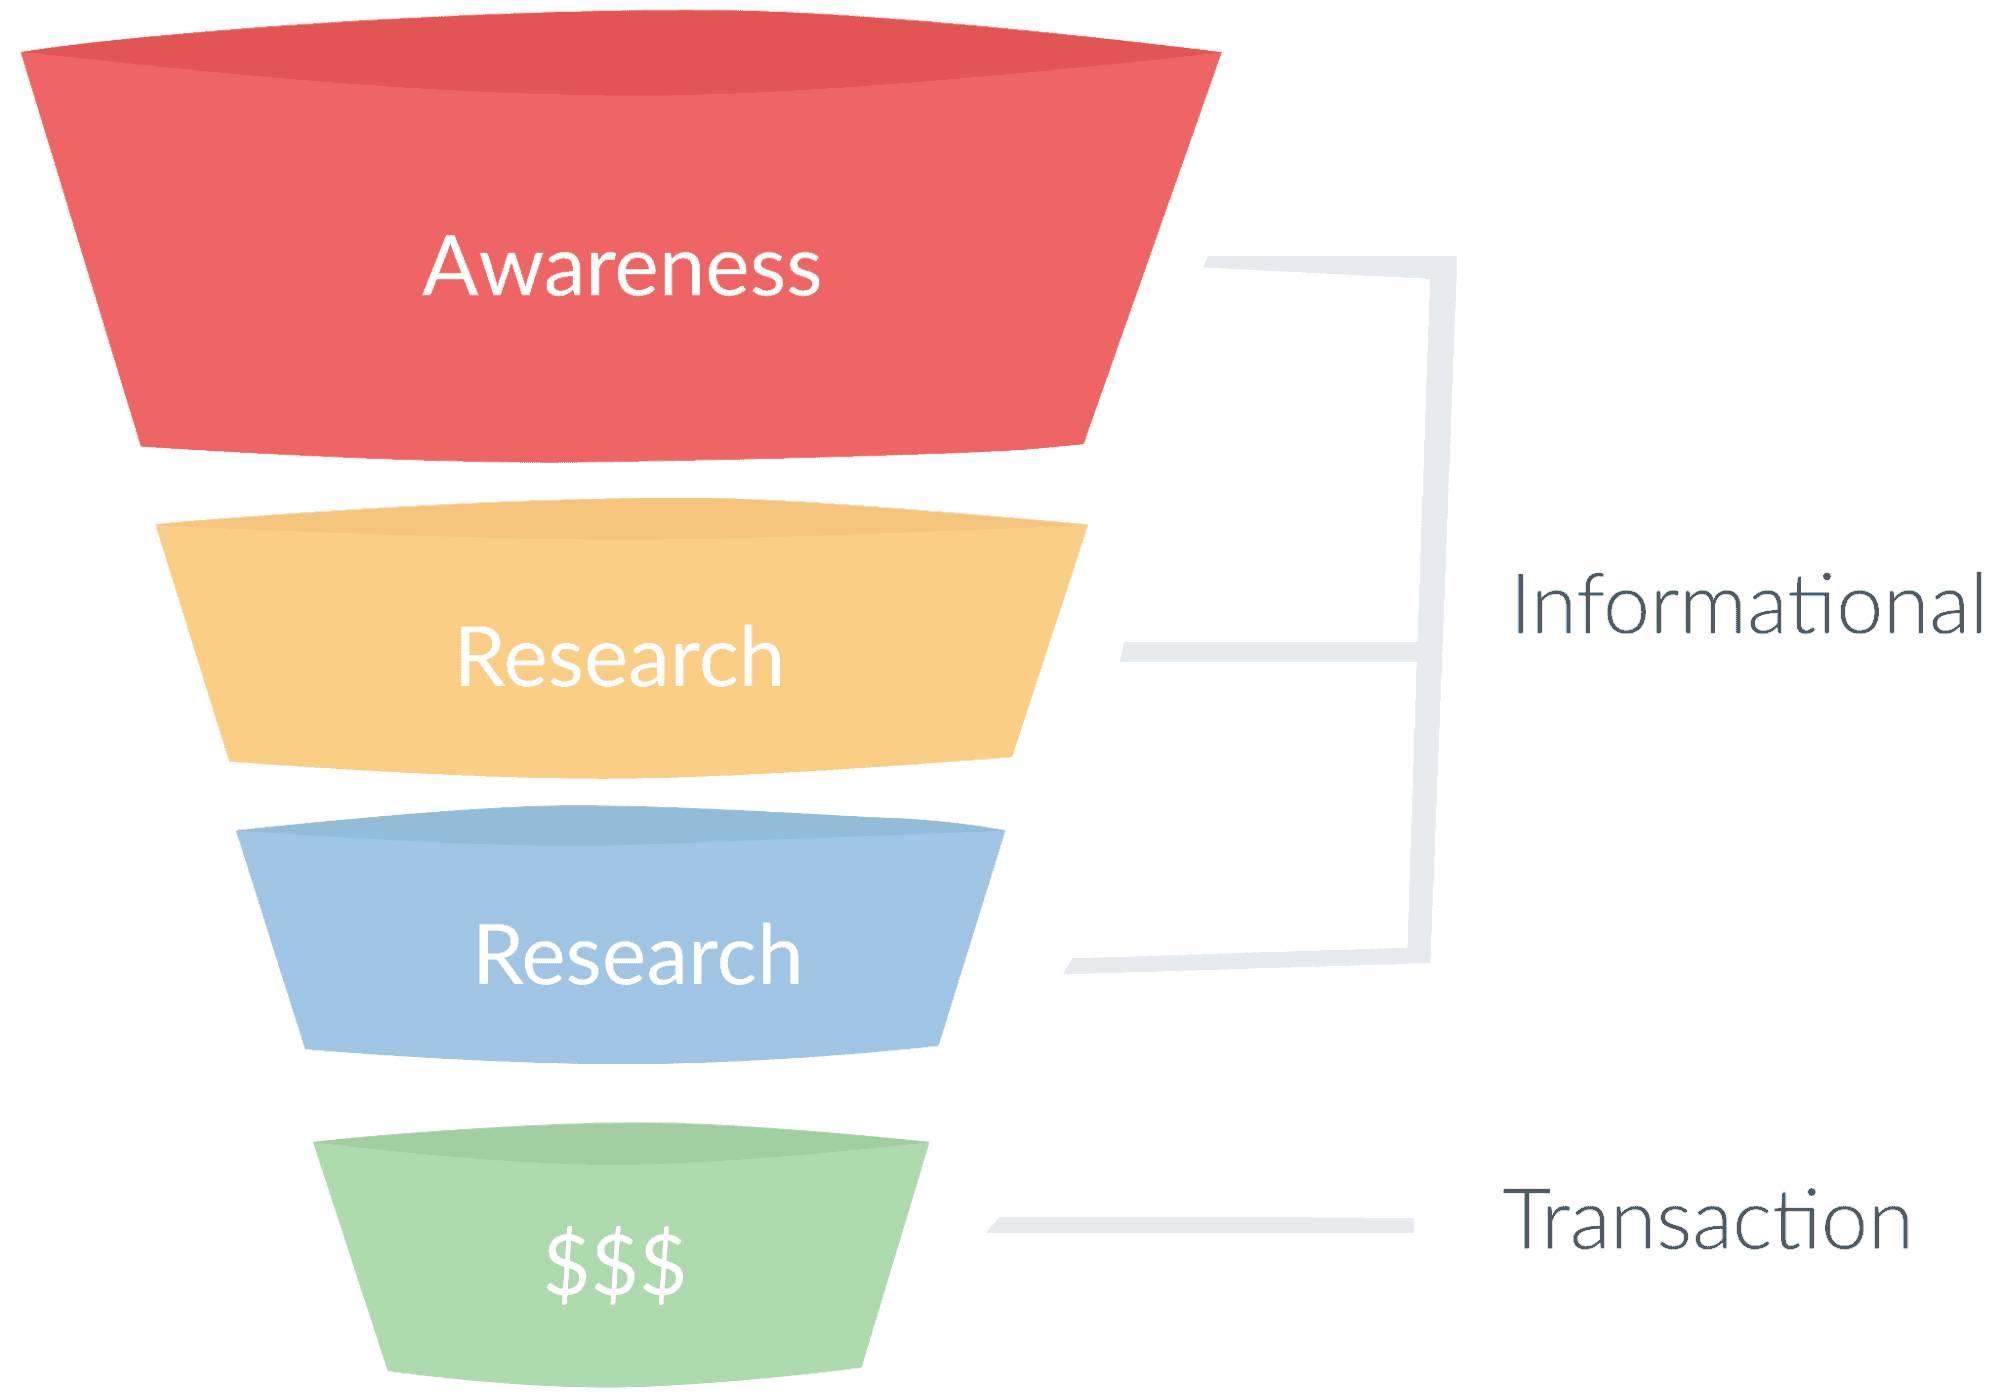 A simple sales funnel